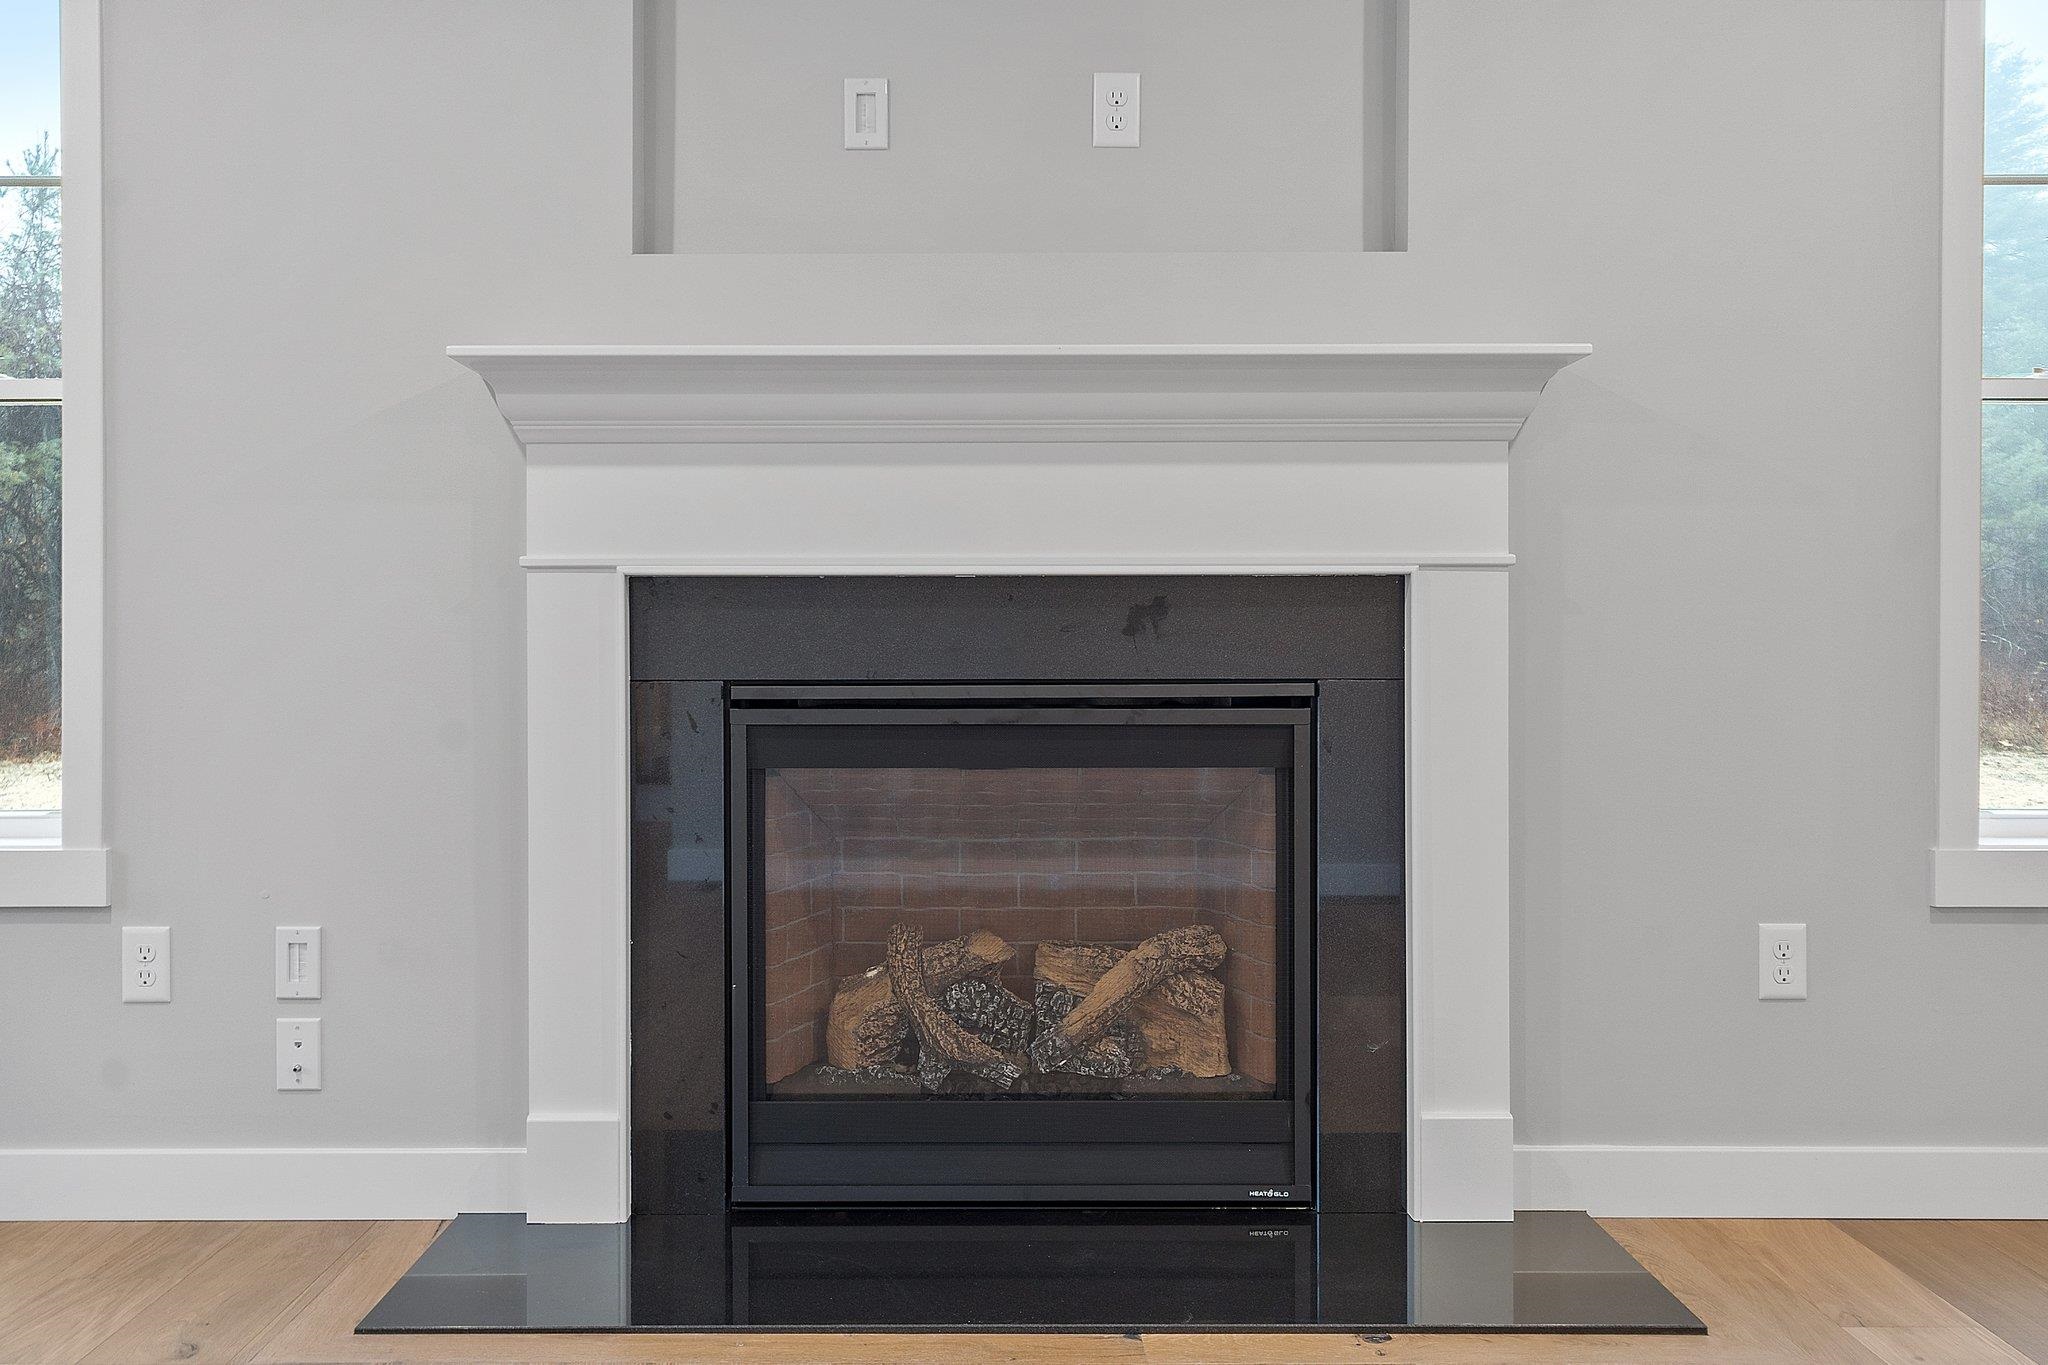 GAS FIREPLACE IN FAMILY ROOM